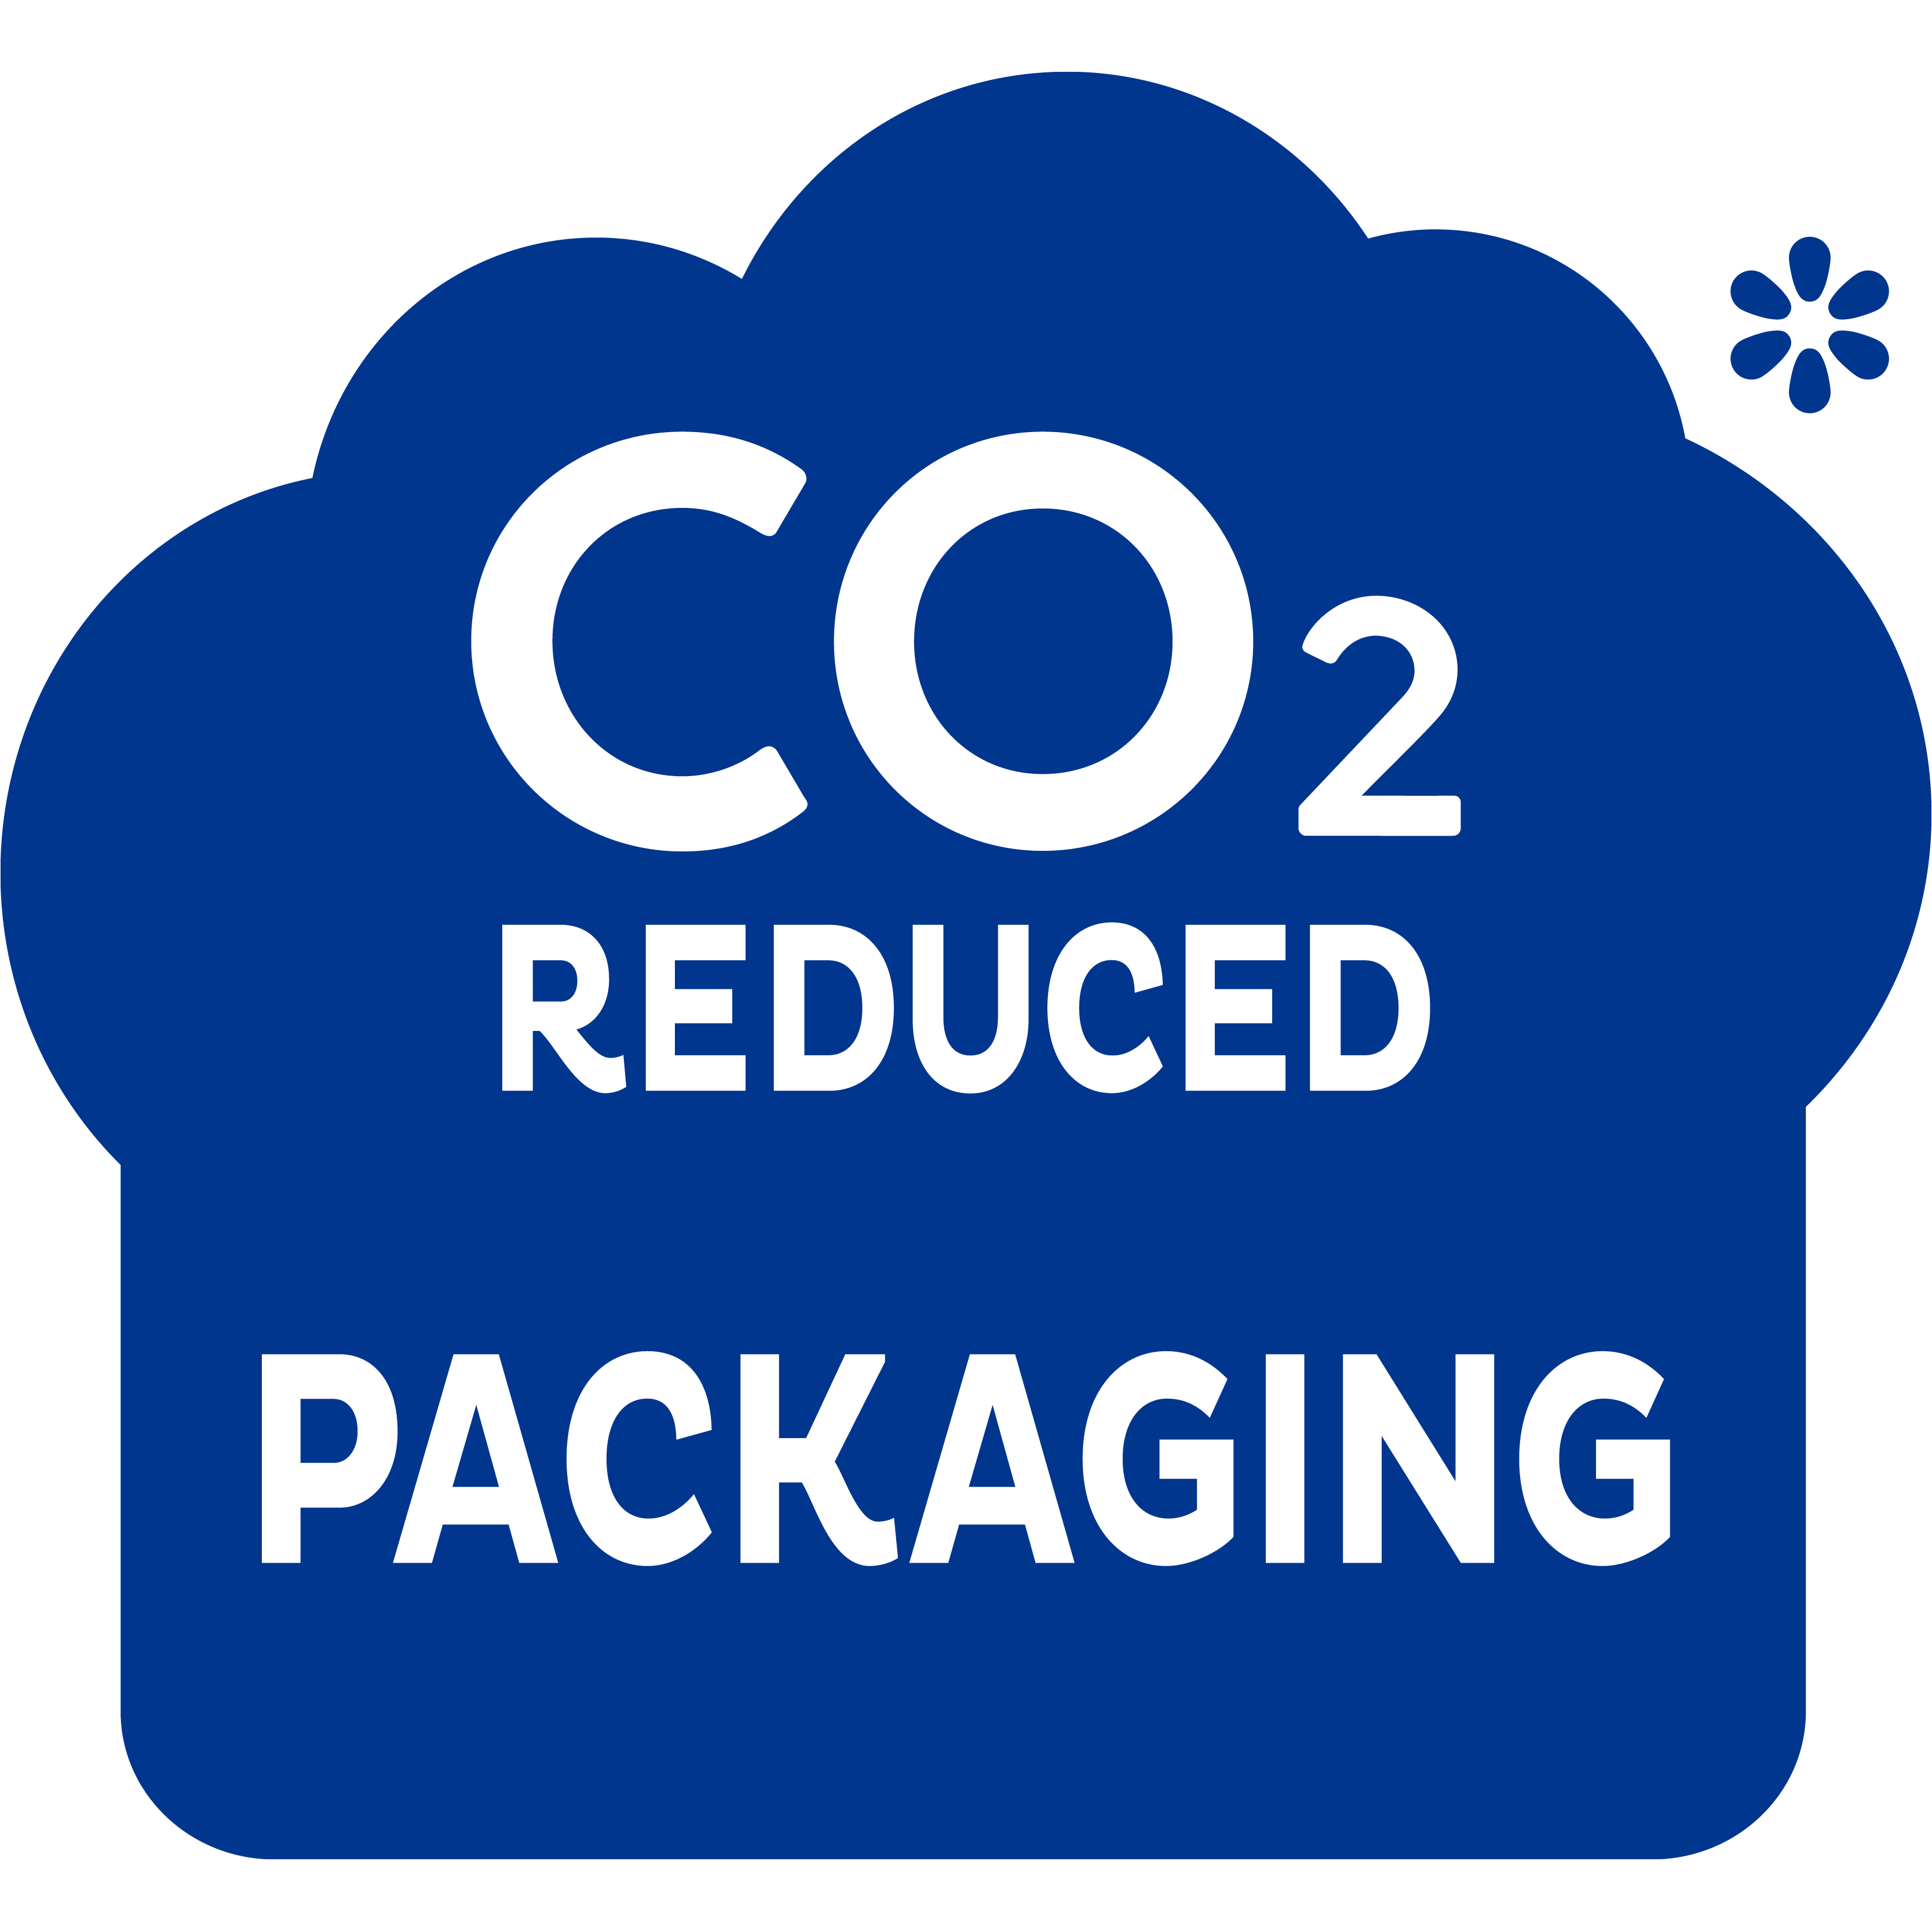 CO2 reduced packaging - for a step in the right direction